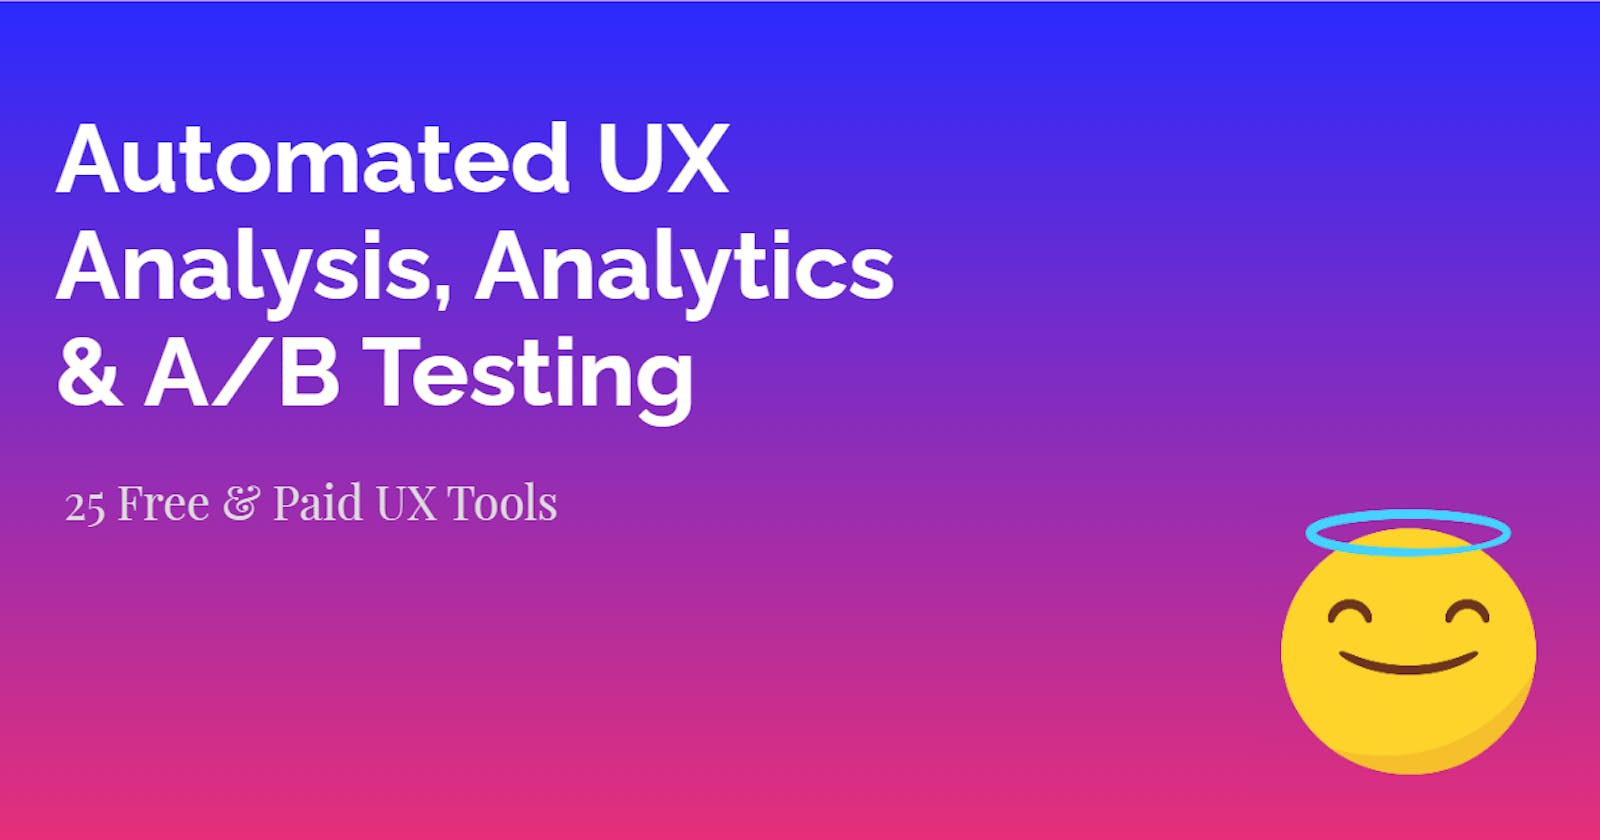 Automated UX Analysis, Analytics and A/B Testing Tools | UX